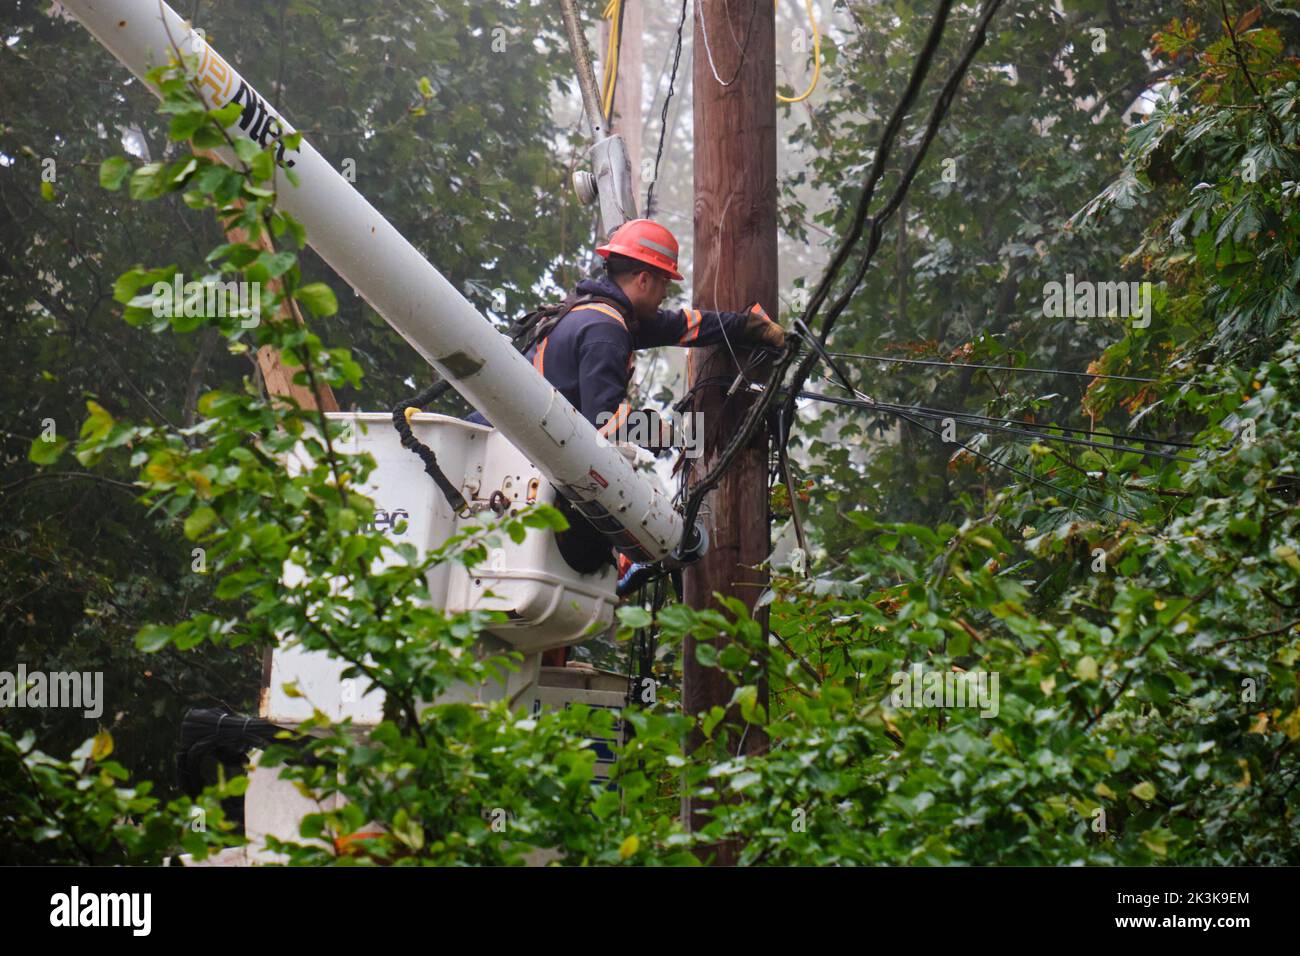 Halifax, Nova Scotia, Canada. September 27th, 2022. NS Power crews at work reattaching a broken electrical pole in Halifax. With over one quarter of the population of the Province still out of power for now more than 3.5 days the long and slow process of repairing the grid continues after the passage of Hurricane. Yesterday the province announced a $100 per household support for those who have lost power for over 48 hours. Credit: meanderingemu/Alamy Live News Stock Photo